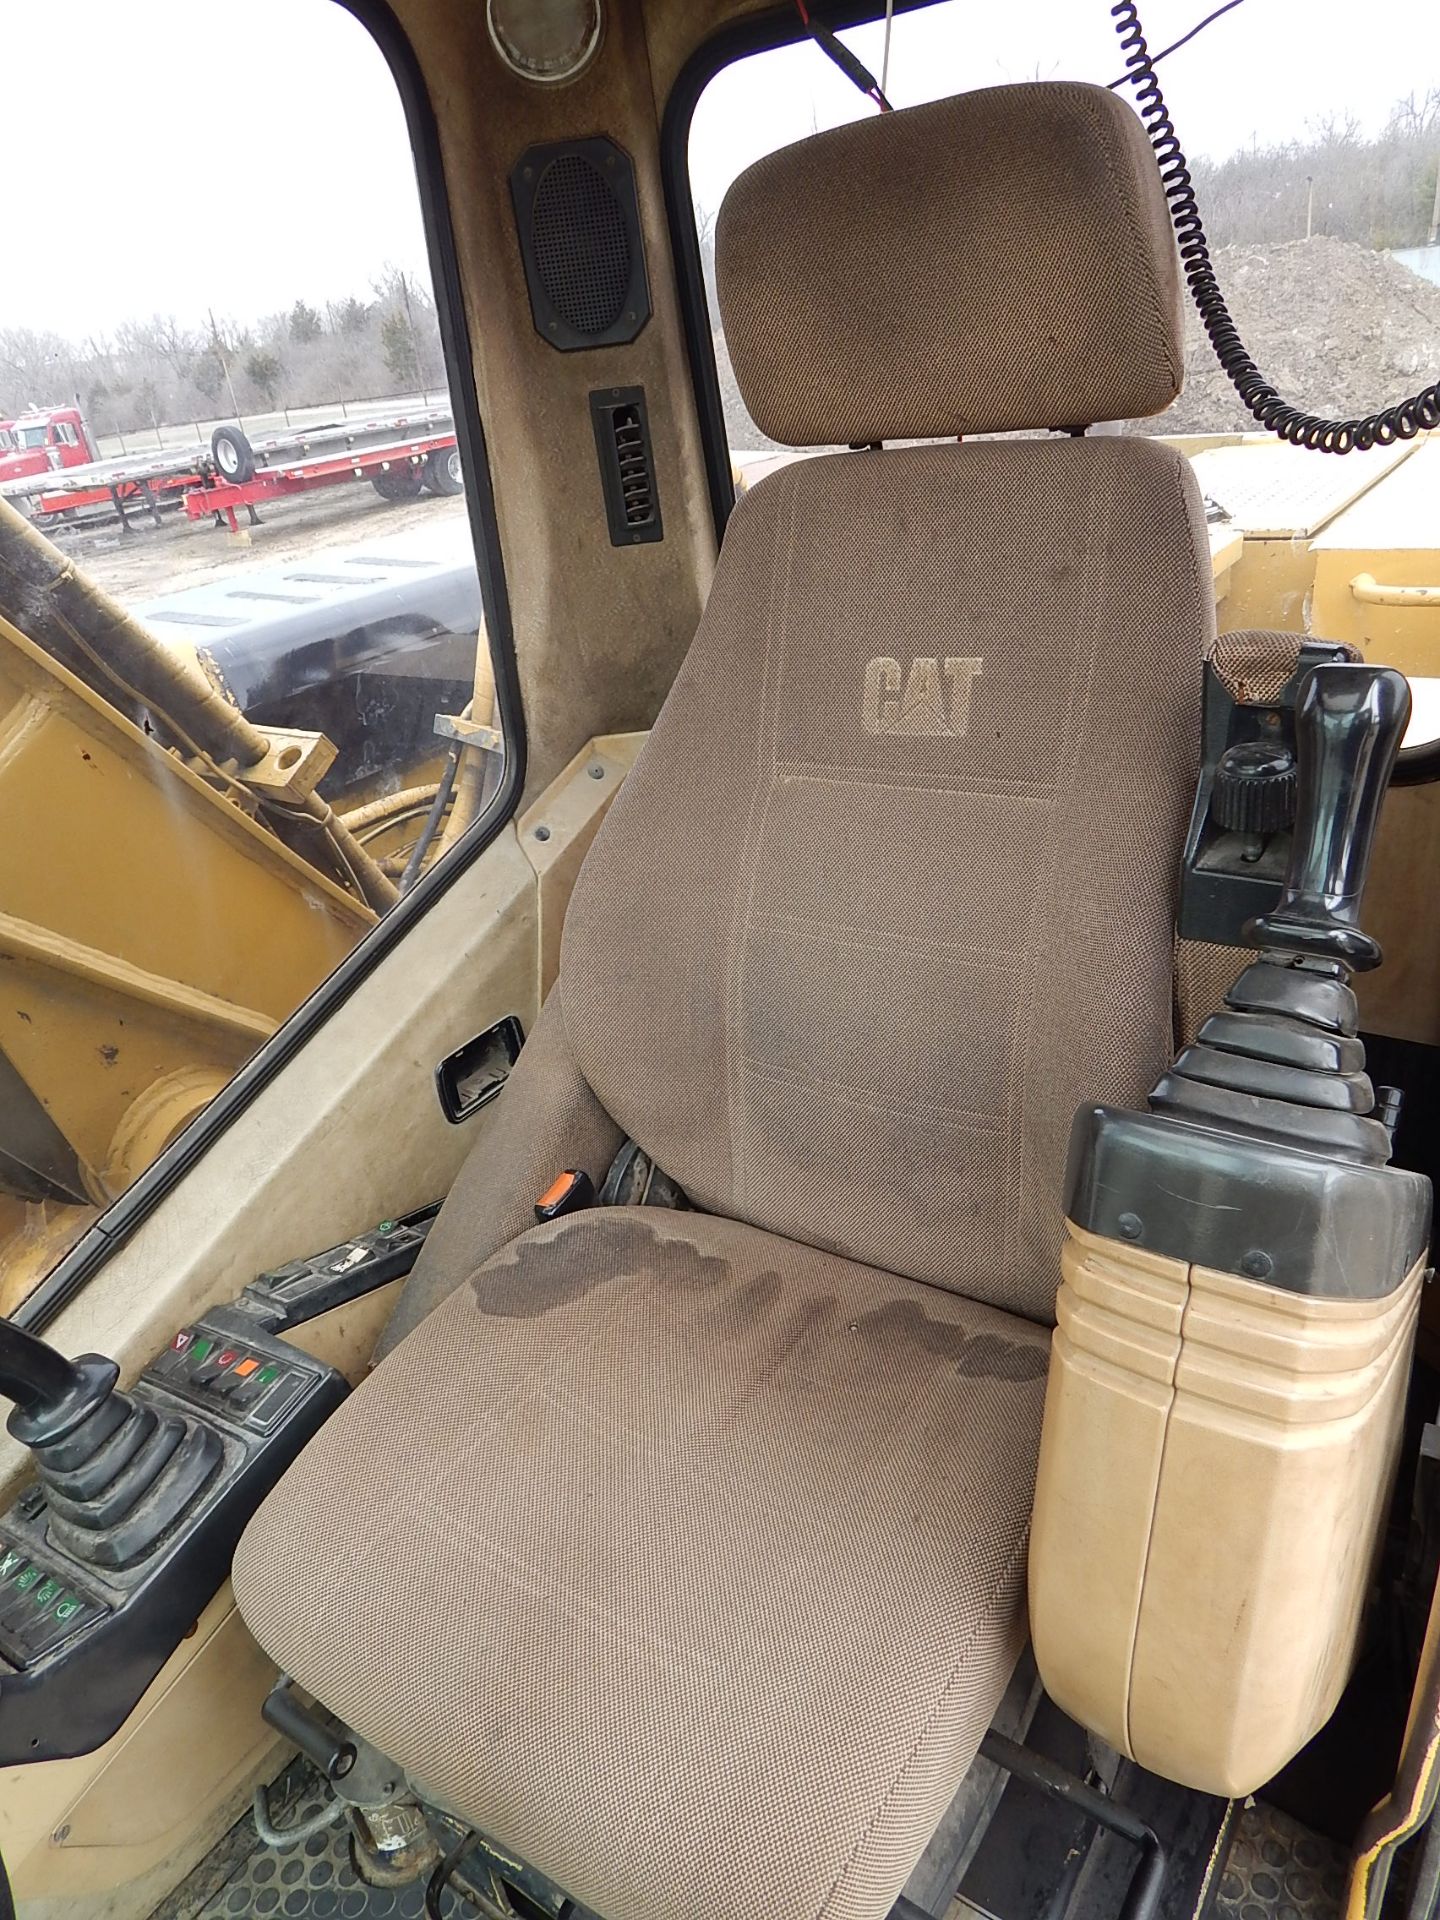 2000 Caterpillar Model M320 Mobile Excavator SN 06WL00522, (4) Outriggers, Dual Tires, Enclosed Cab, - Image 23 of 25